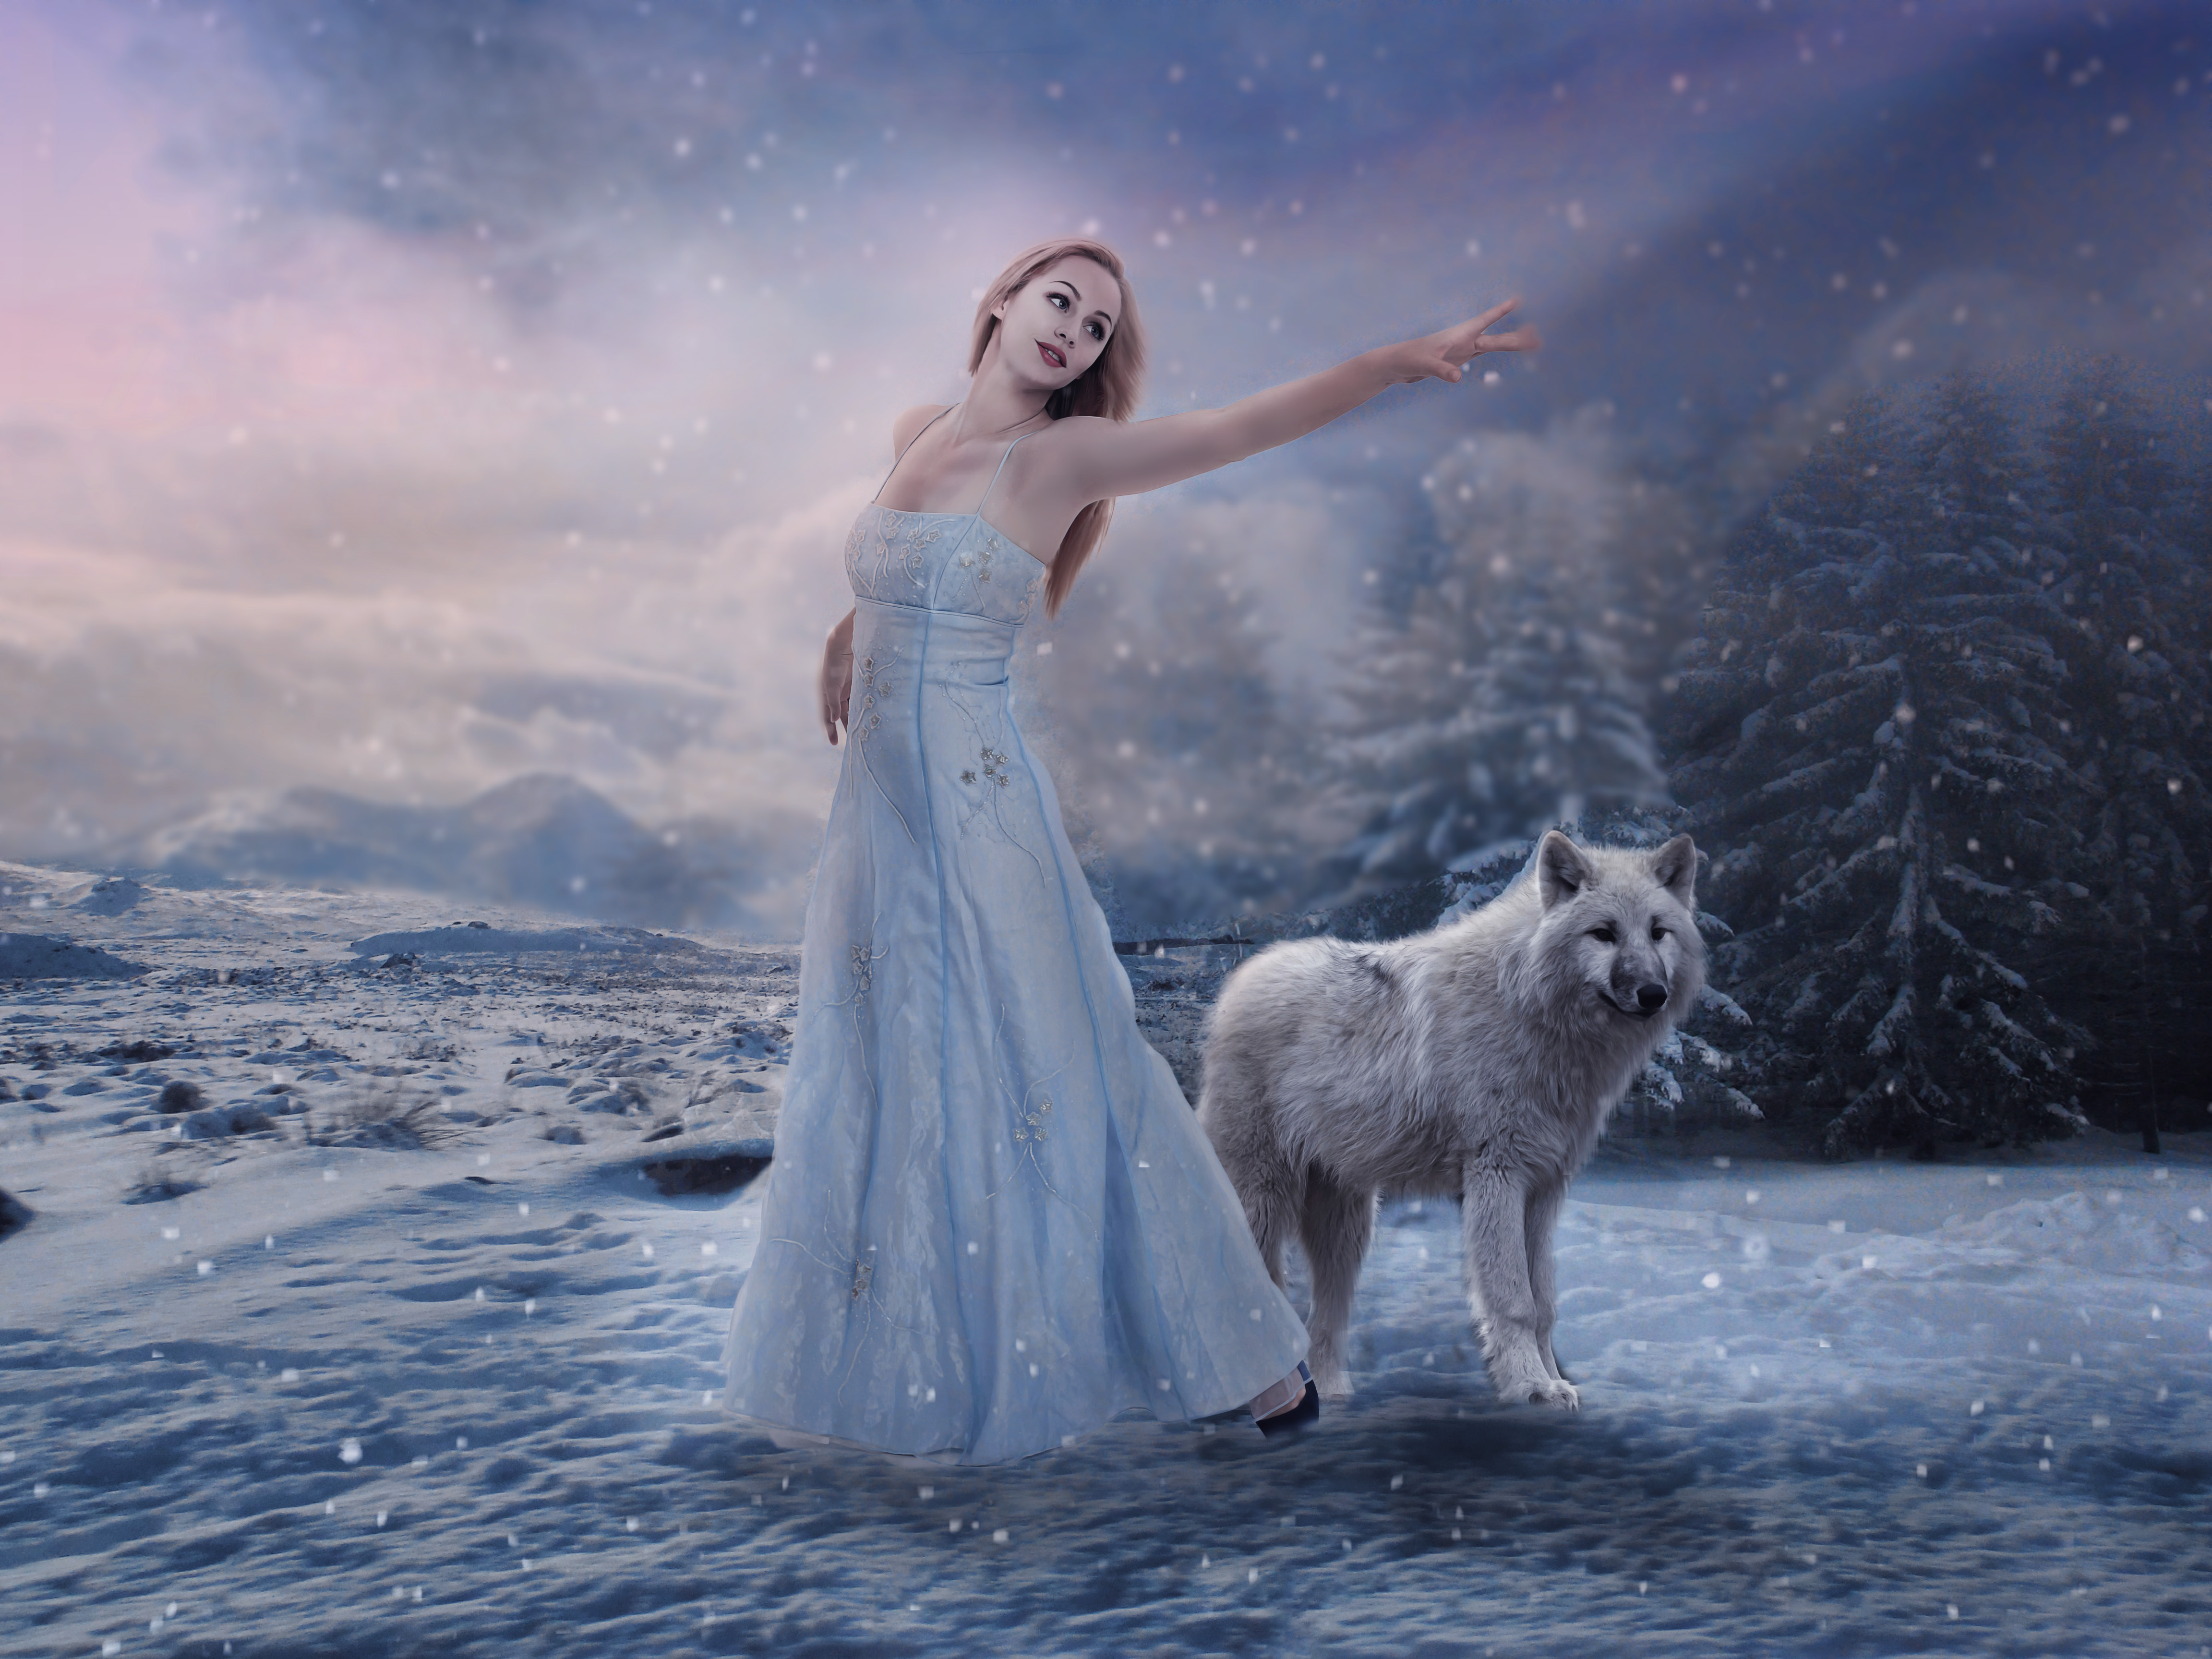 Wallpapers the girl and the wolf winter snow on the desktop